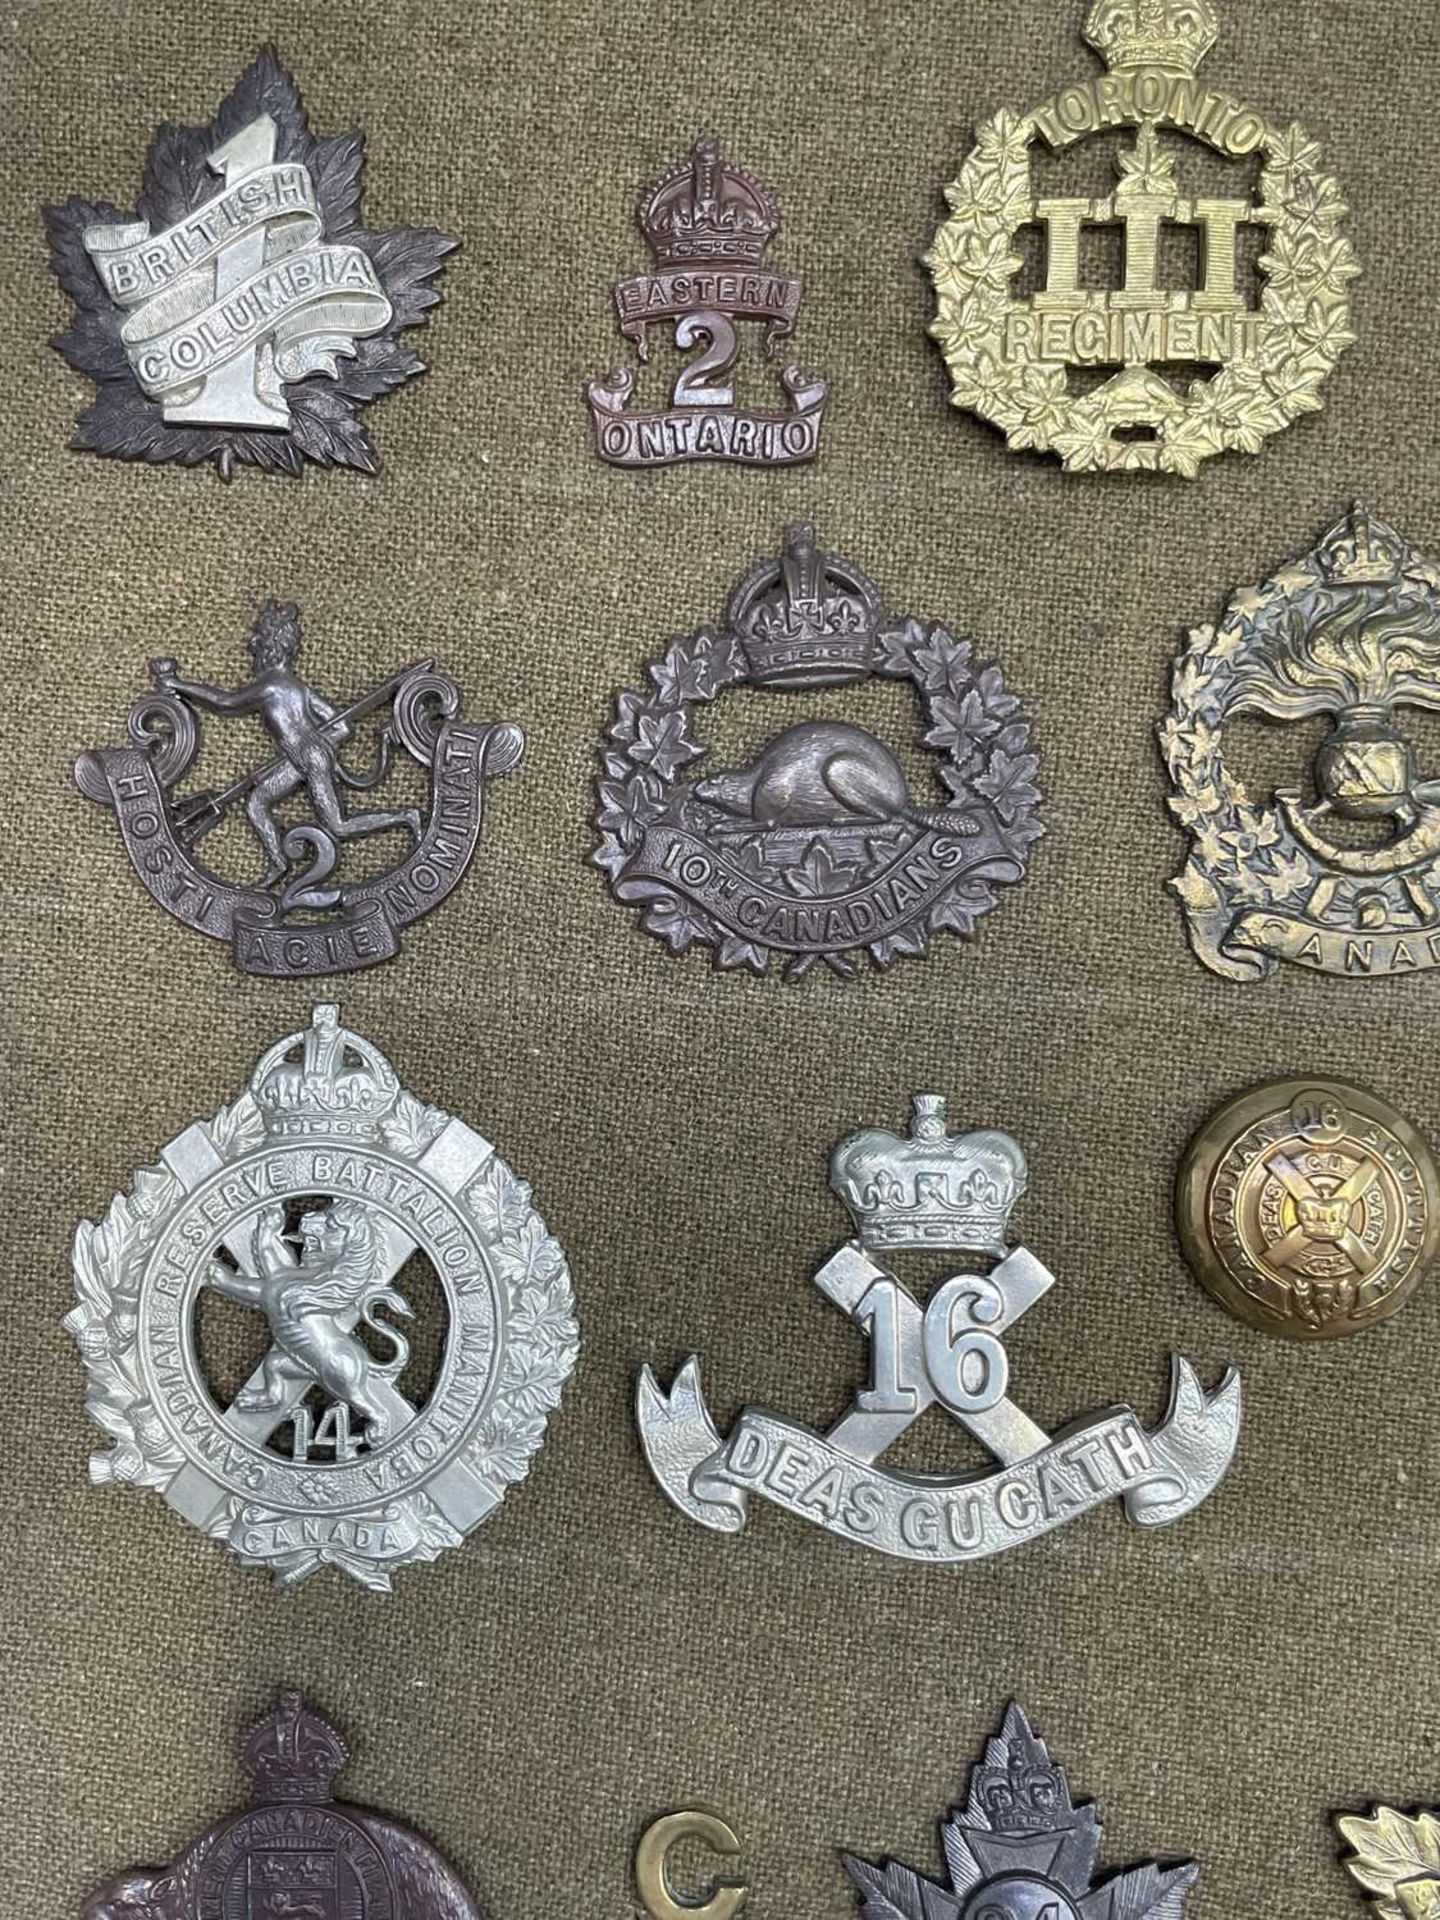 Canadian Expeditionary Forces 1 to 39 Battalions. A display card containing cap badges, collar dogs, - Image 3 of 5